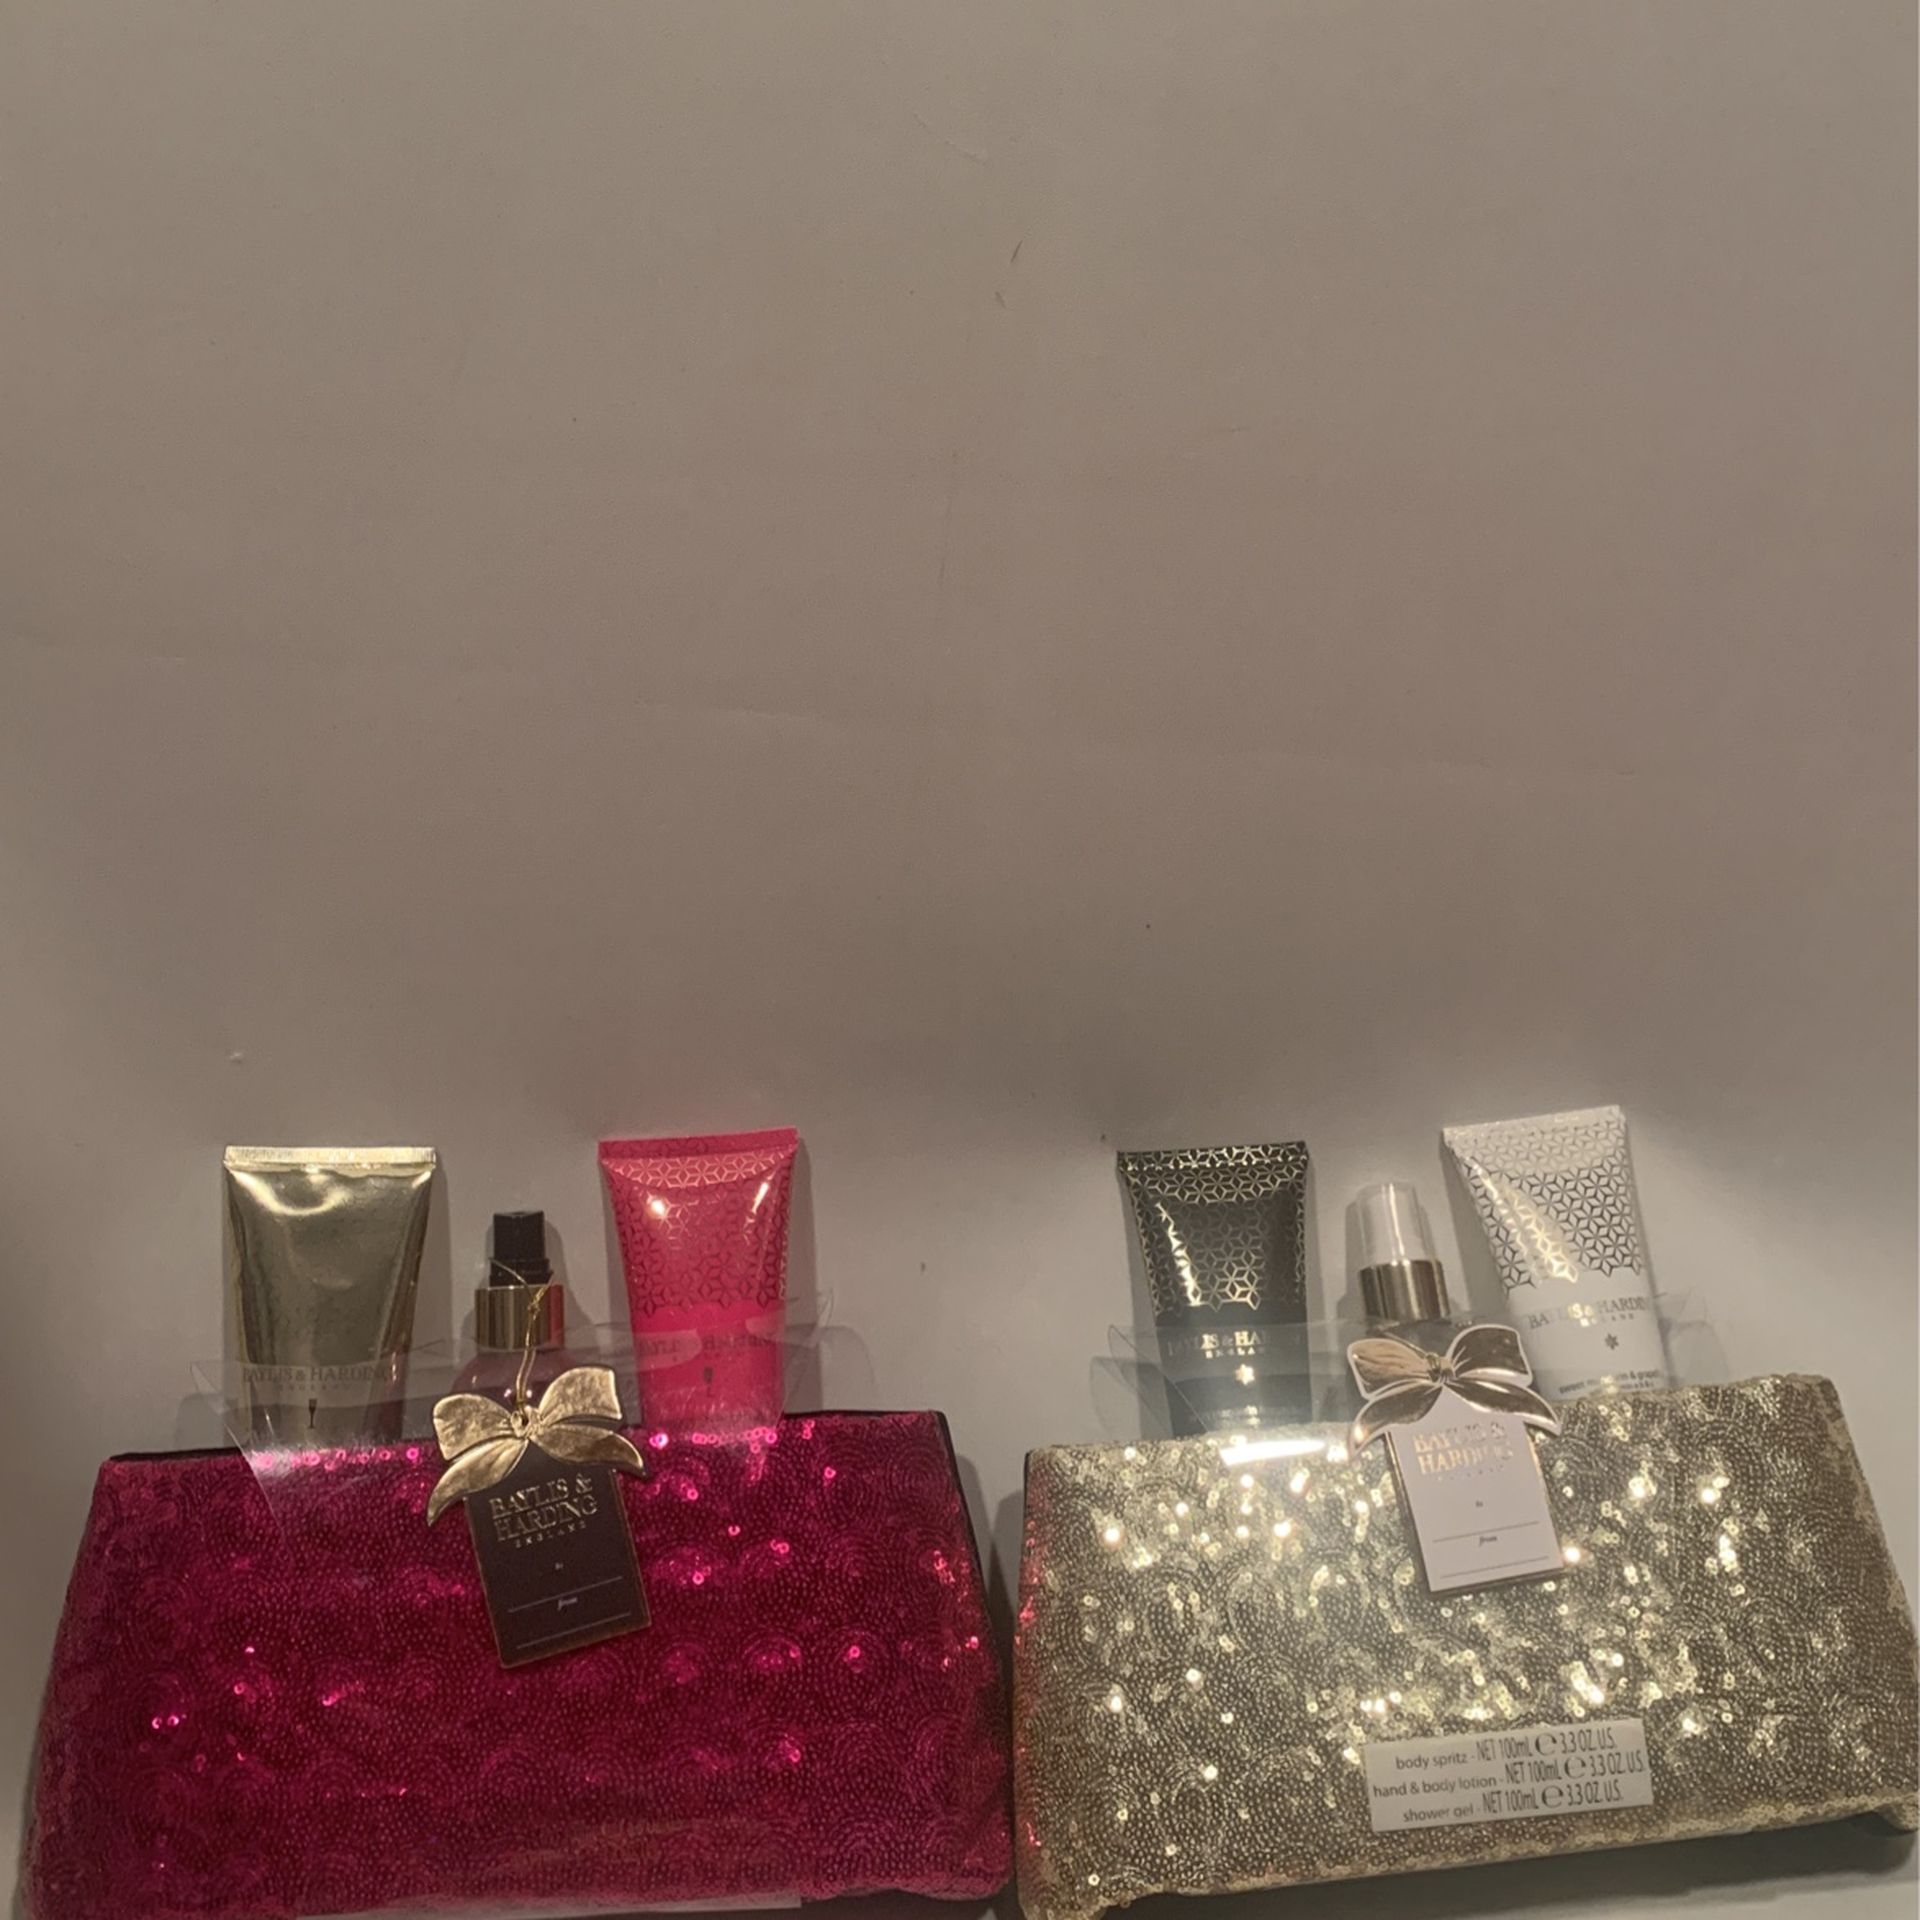 3 PCs Gift Set 2 Different Colors Pink & Gold 